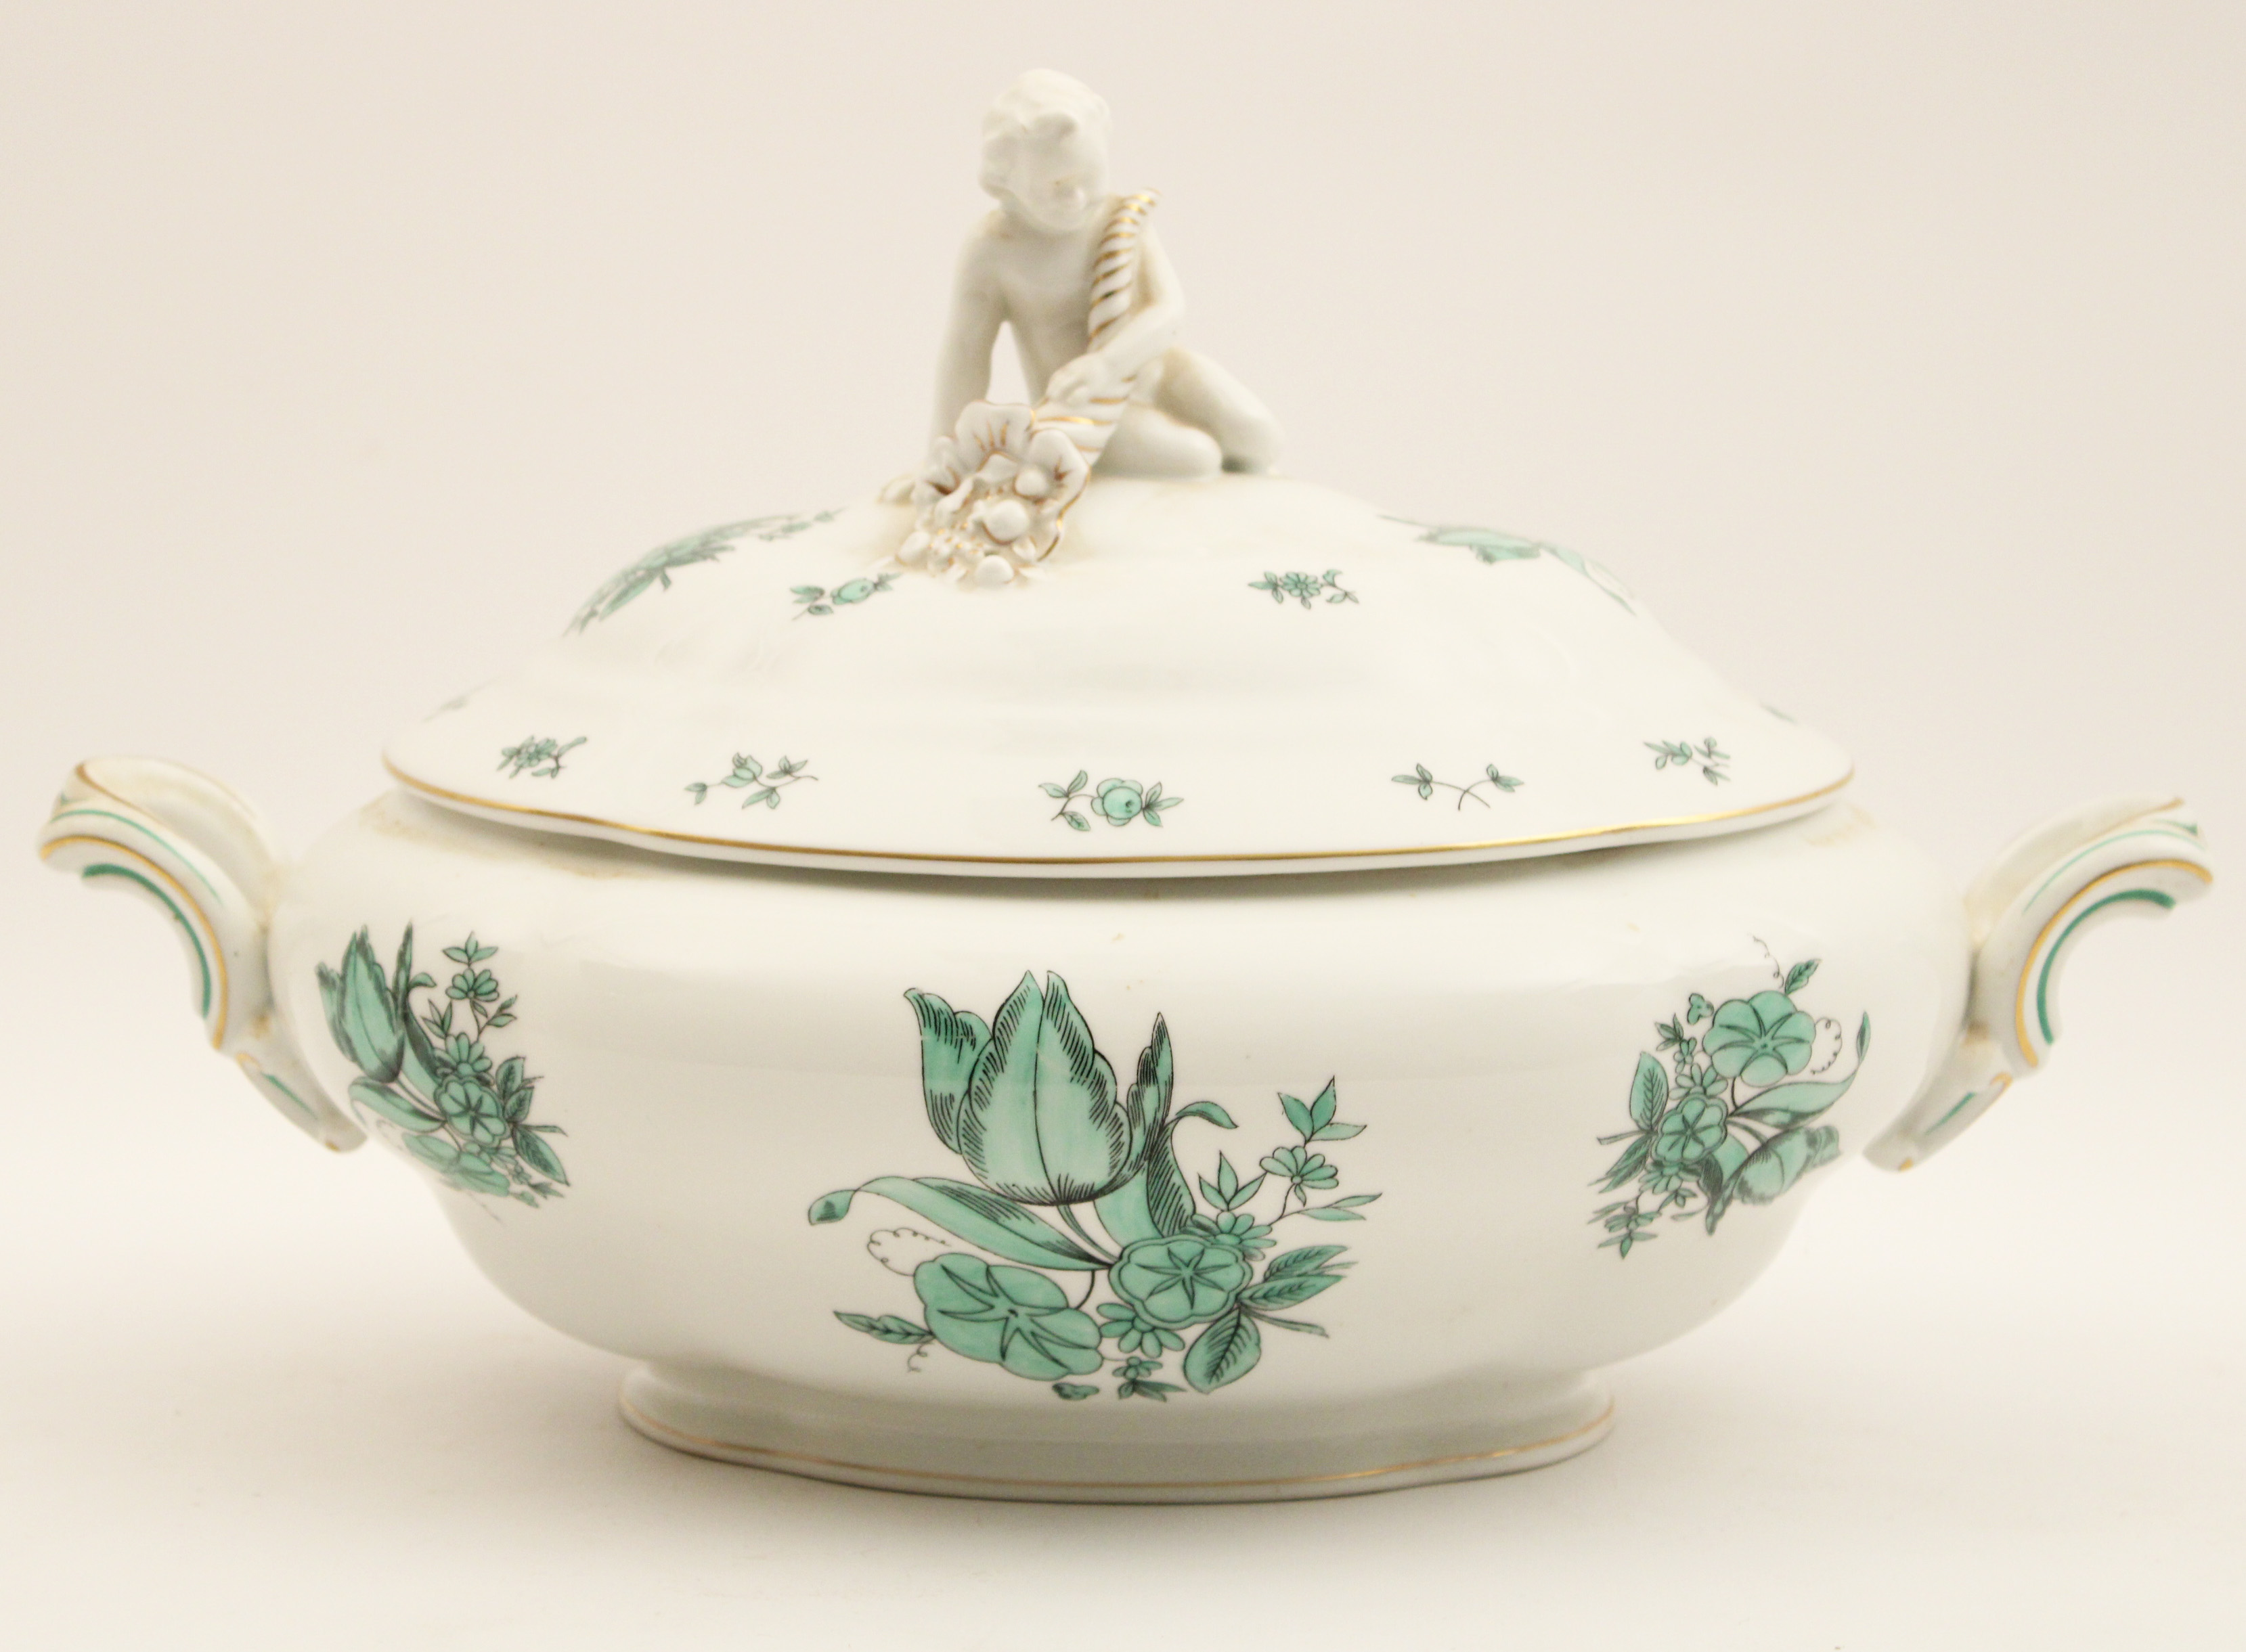 COVERED PORCELAIN TUREEN WITH PUTTI